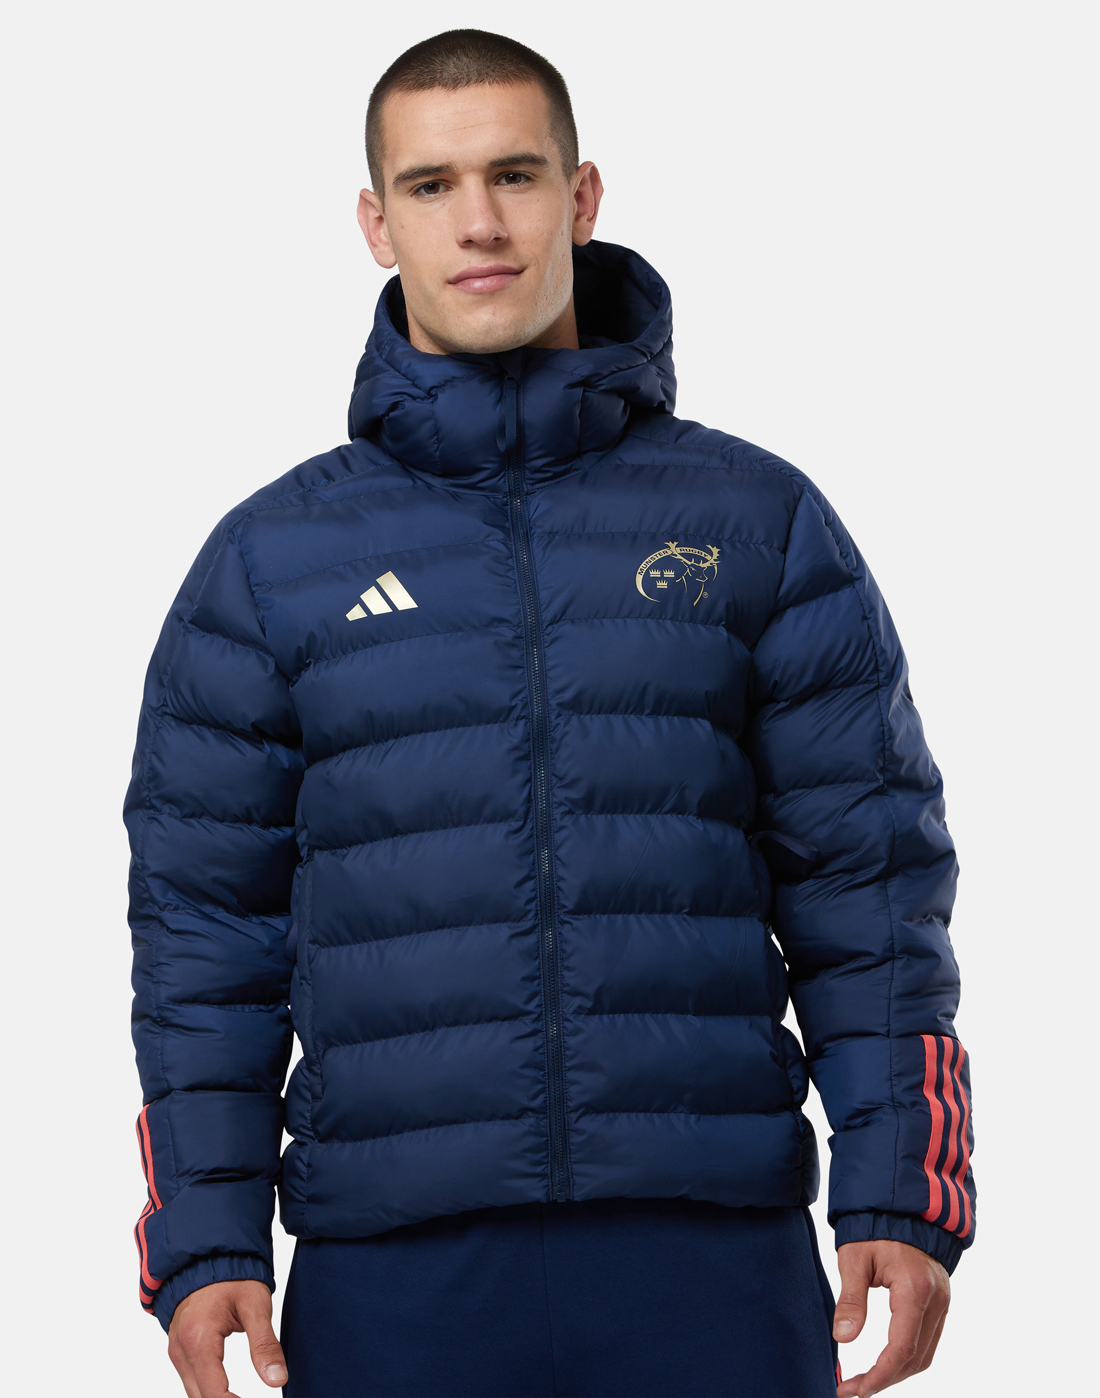 adidas Adults Munster Itavic Jacket - Navy | Life Style Sports IE